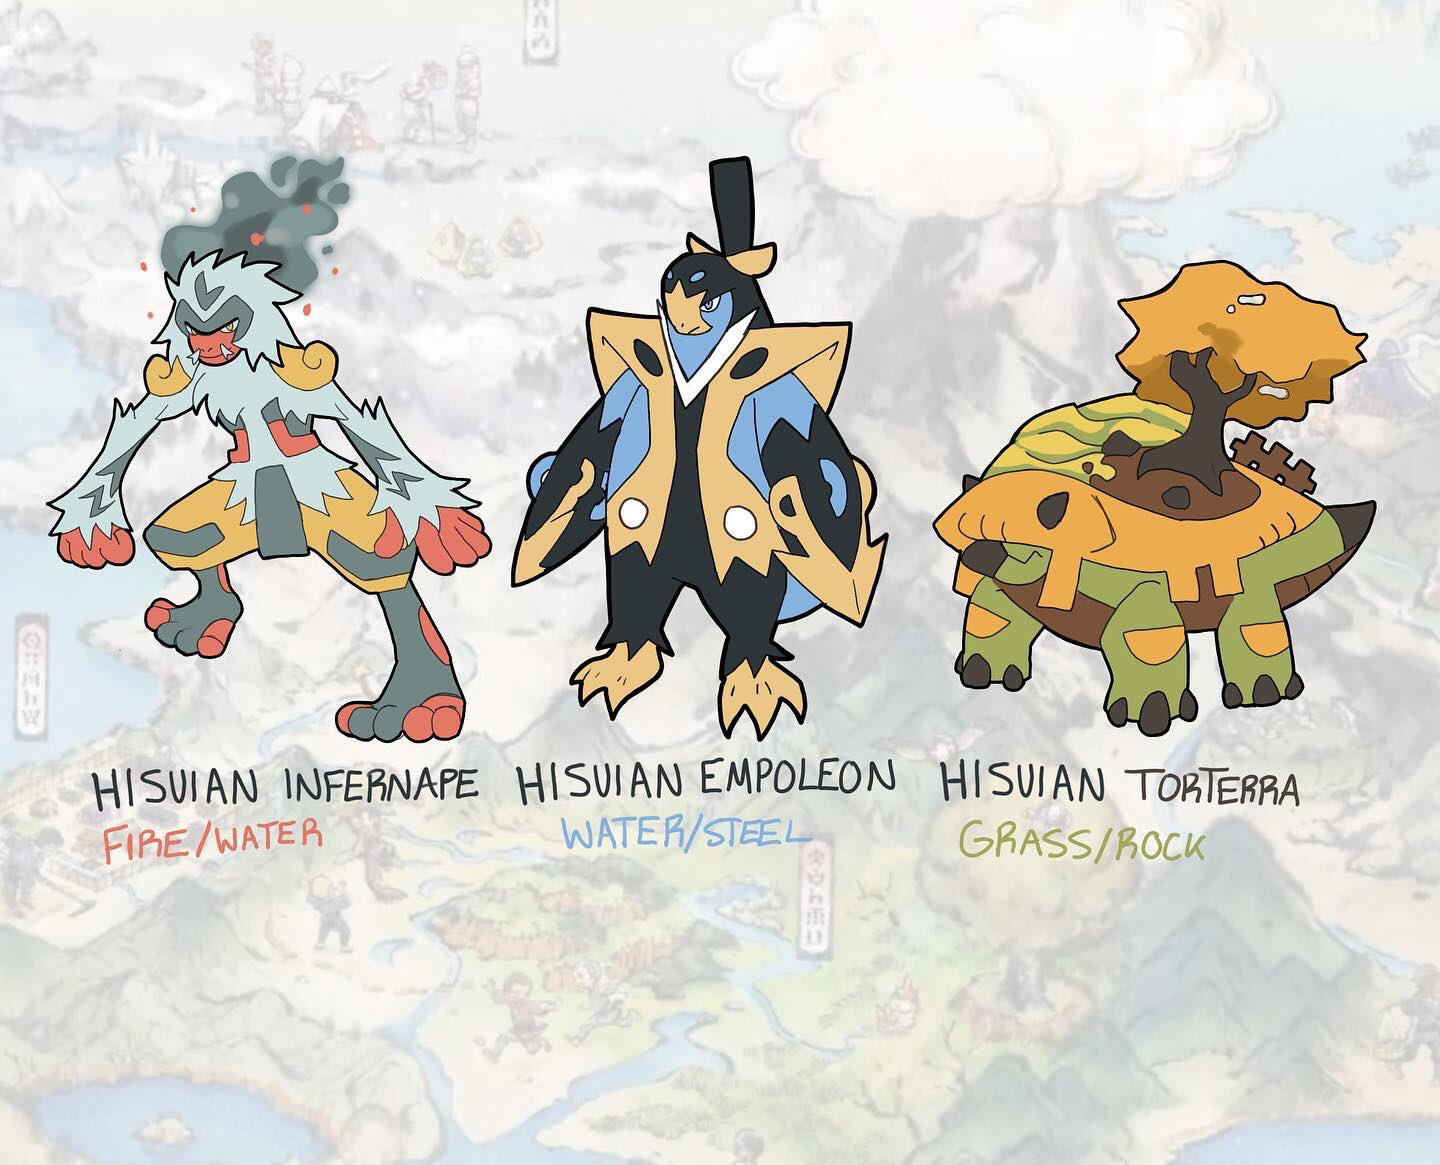 This is my idea for regional variants of the original sinnoh pokemon starters in a more ancient setting. Infernape is based on japanese macaques, Empoleon on emperor meiji, and Torterra on gingko trees, traditional japanese farmers and terraced rice farms. Done in 2022.